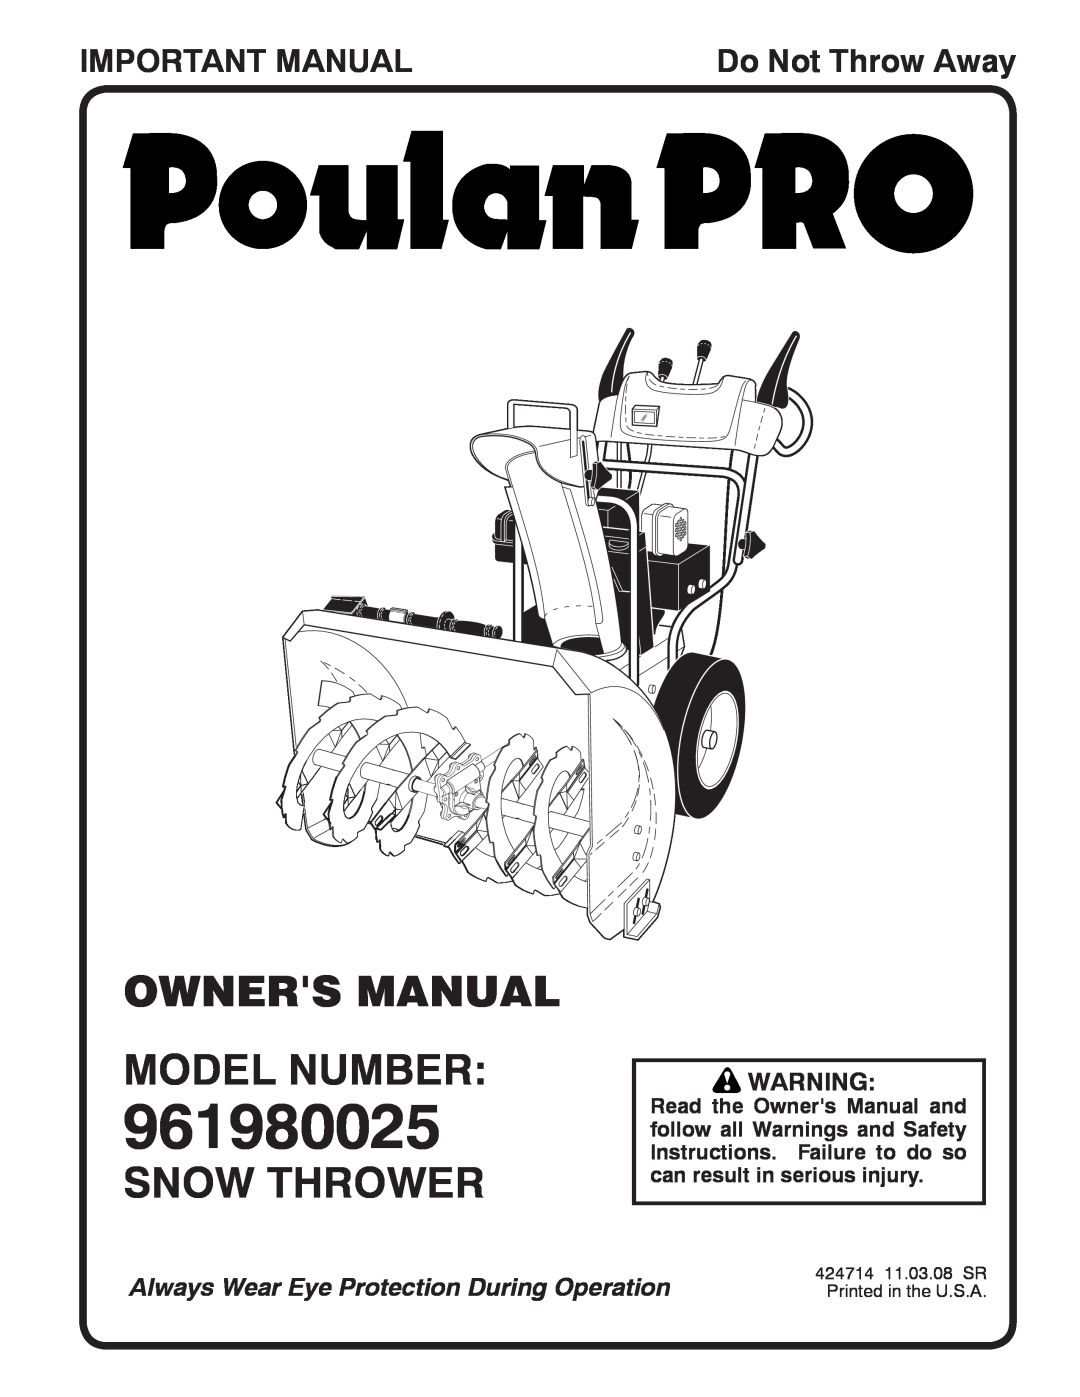 Poulan 96198002501, 424714 owner manual Owners Manual Model Number, Snow Thrower, Important Manual, Do Not Throw Away 